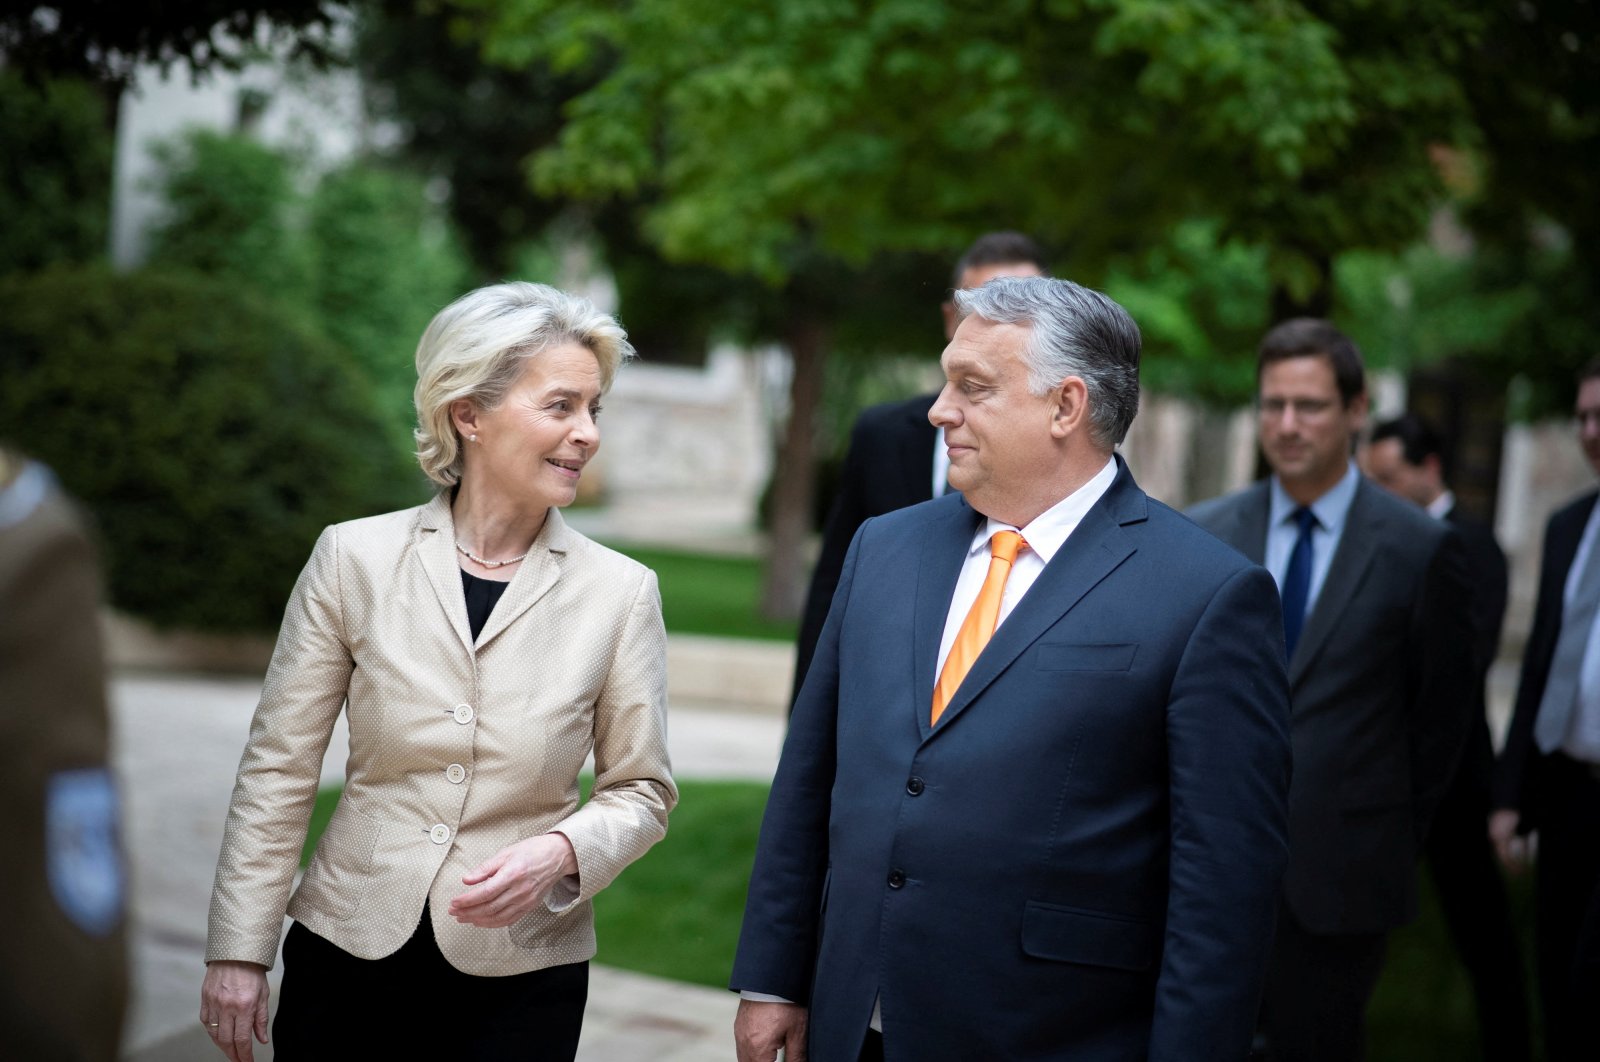 Hungary&#039;s Prime Minister Viktor Orban and European Commission President Ursula von der Leyen talk during their meeting in Budapest, Hungary, May 9, 2022. (Reuters Photo)